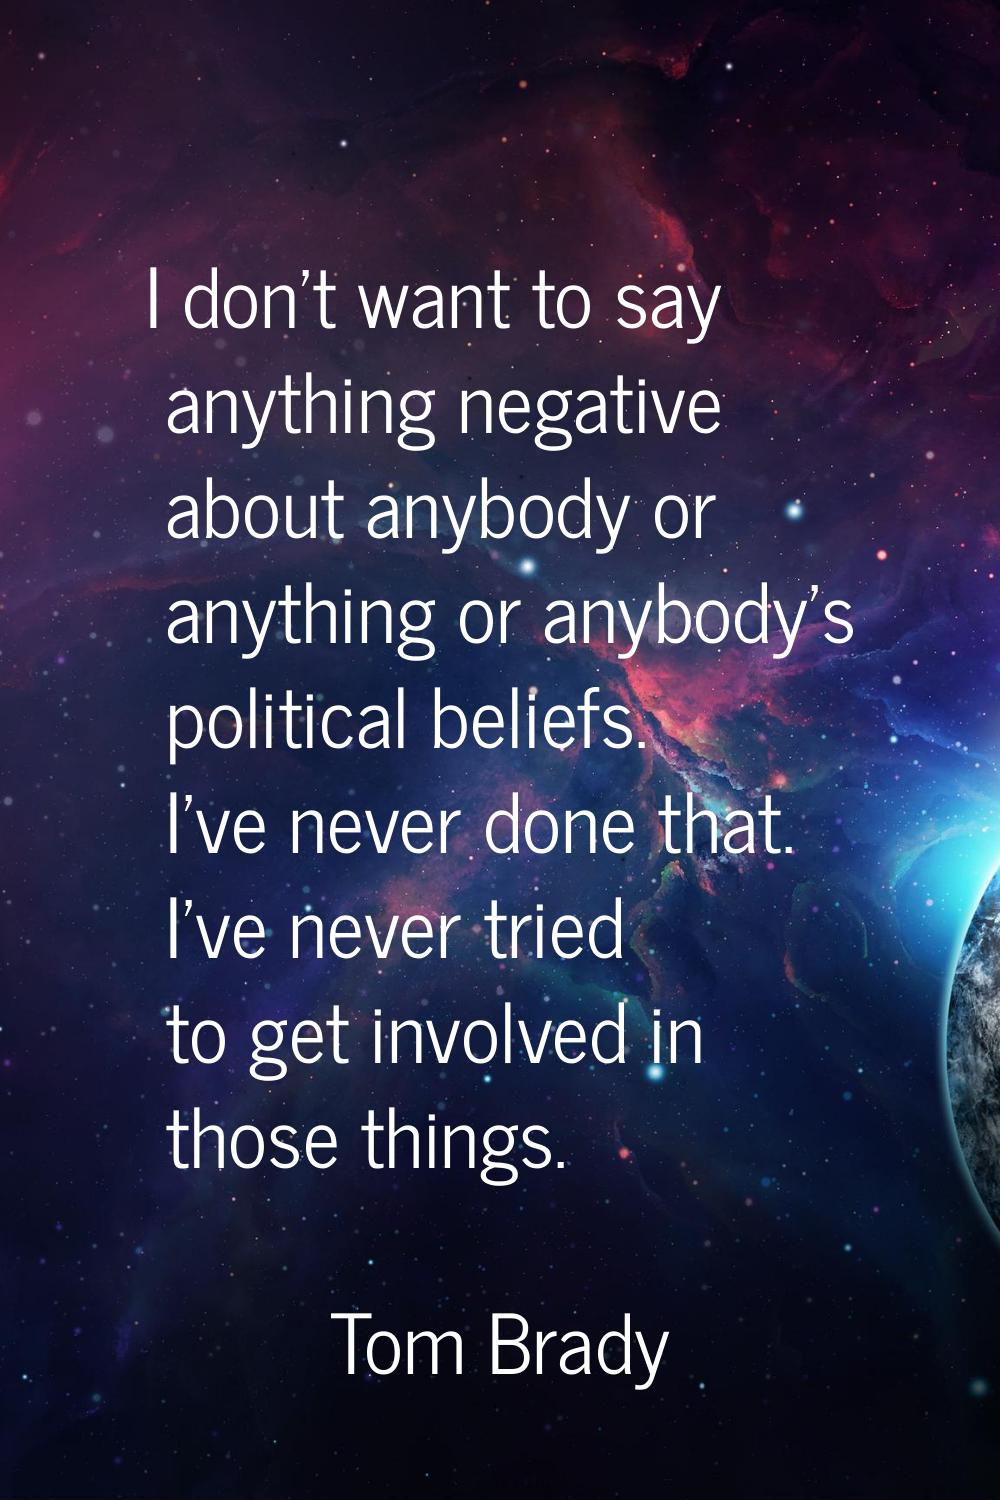 I don't want to say anything negative about anybody or anything or anybody's political beliefs. I'v